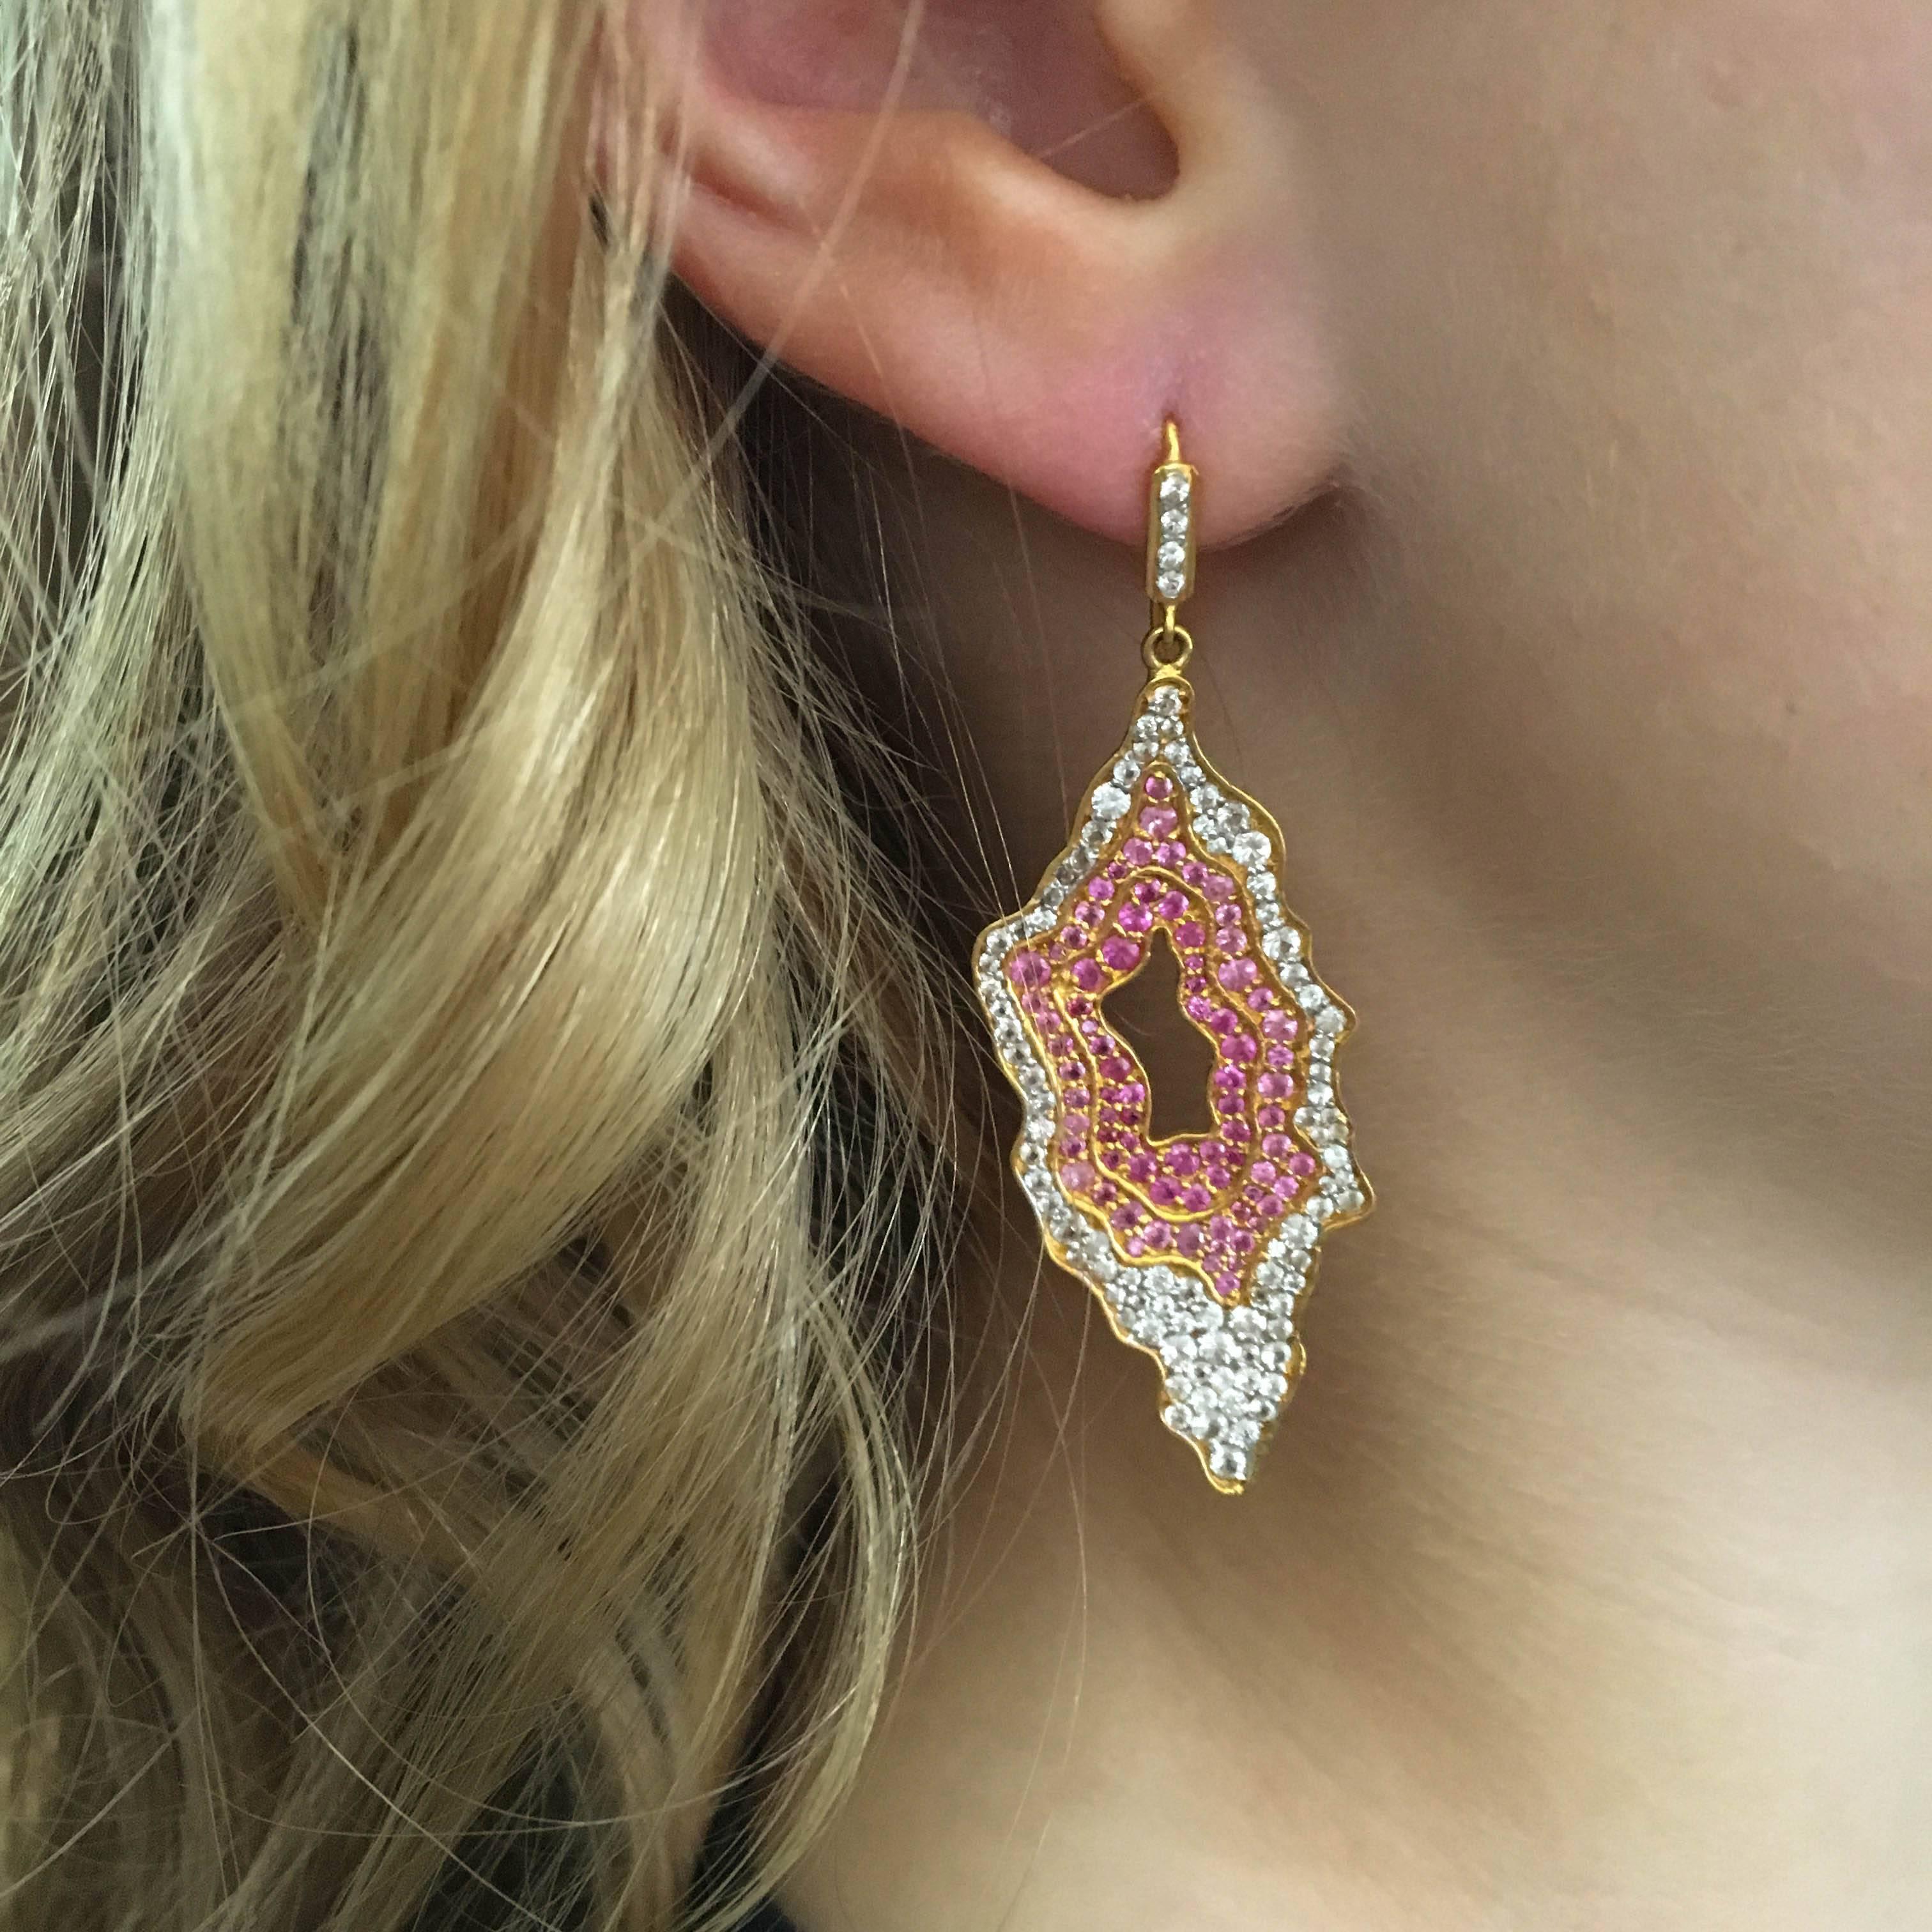 Designed to look like a sliced geodes but made out of pink and white sapphires, these earrings are spectacular and unique.  Lightweight on the ears.  Can be made on posts, upon request.  Stand out in any crowd with these fabulous statement earrings.